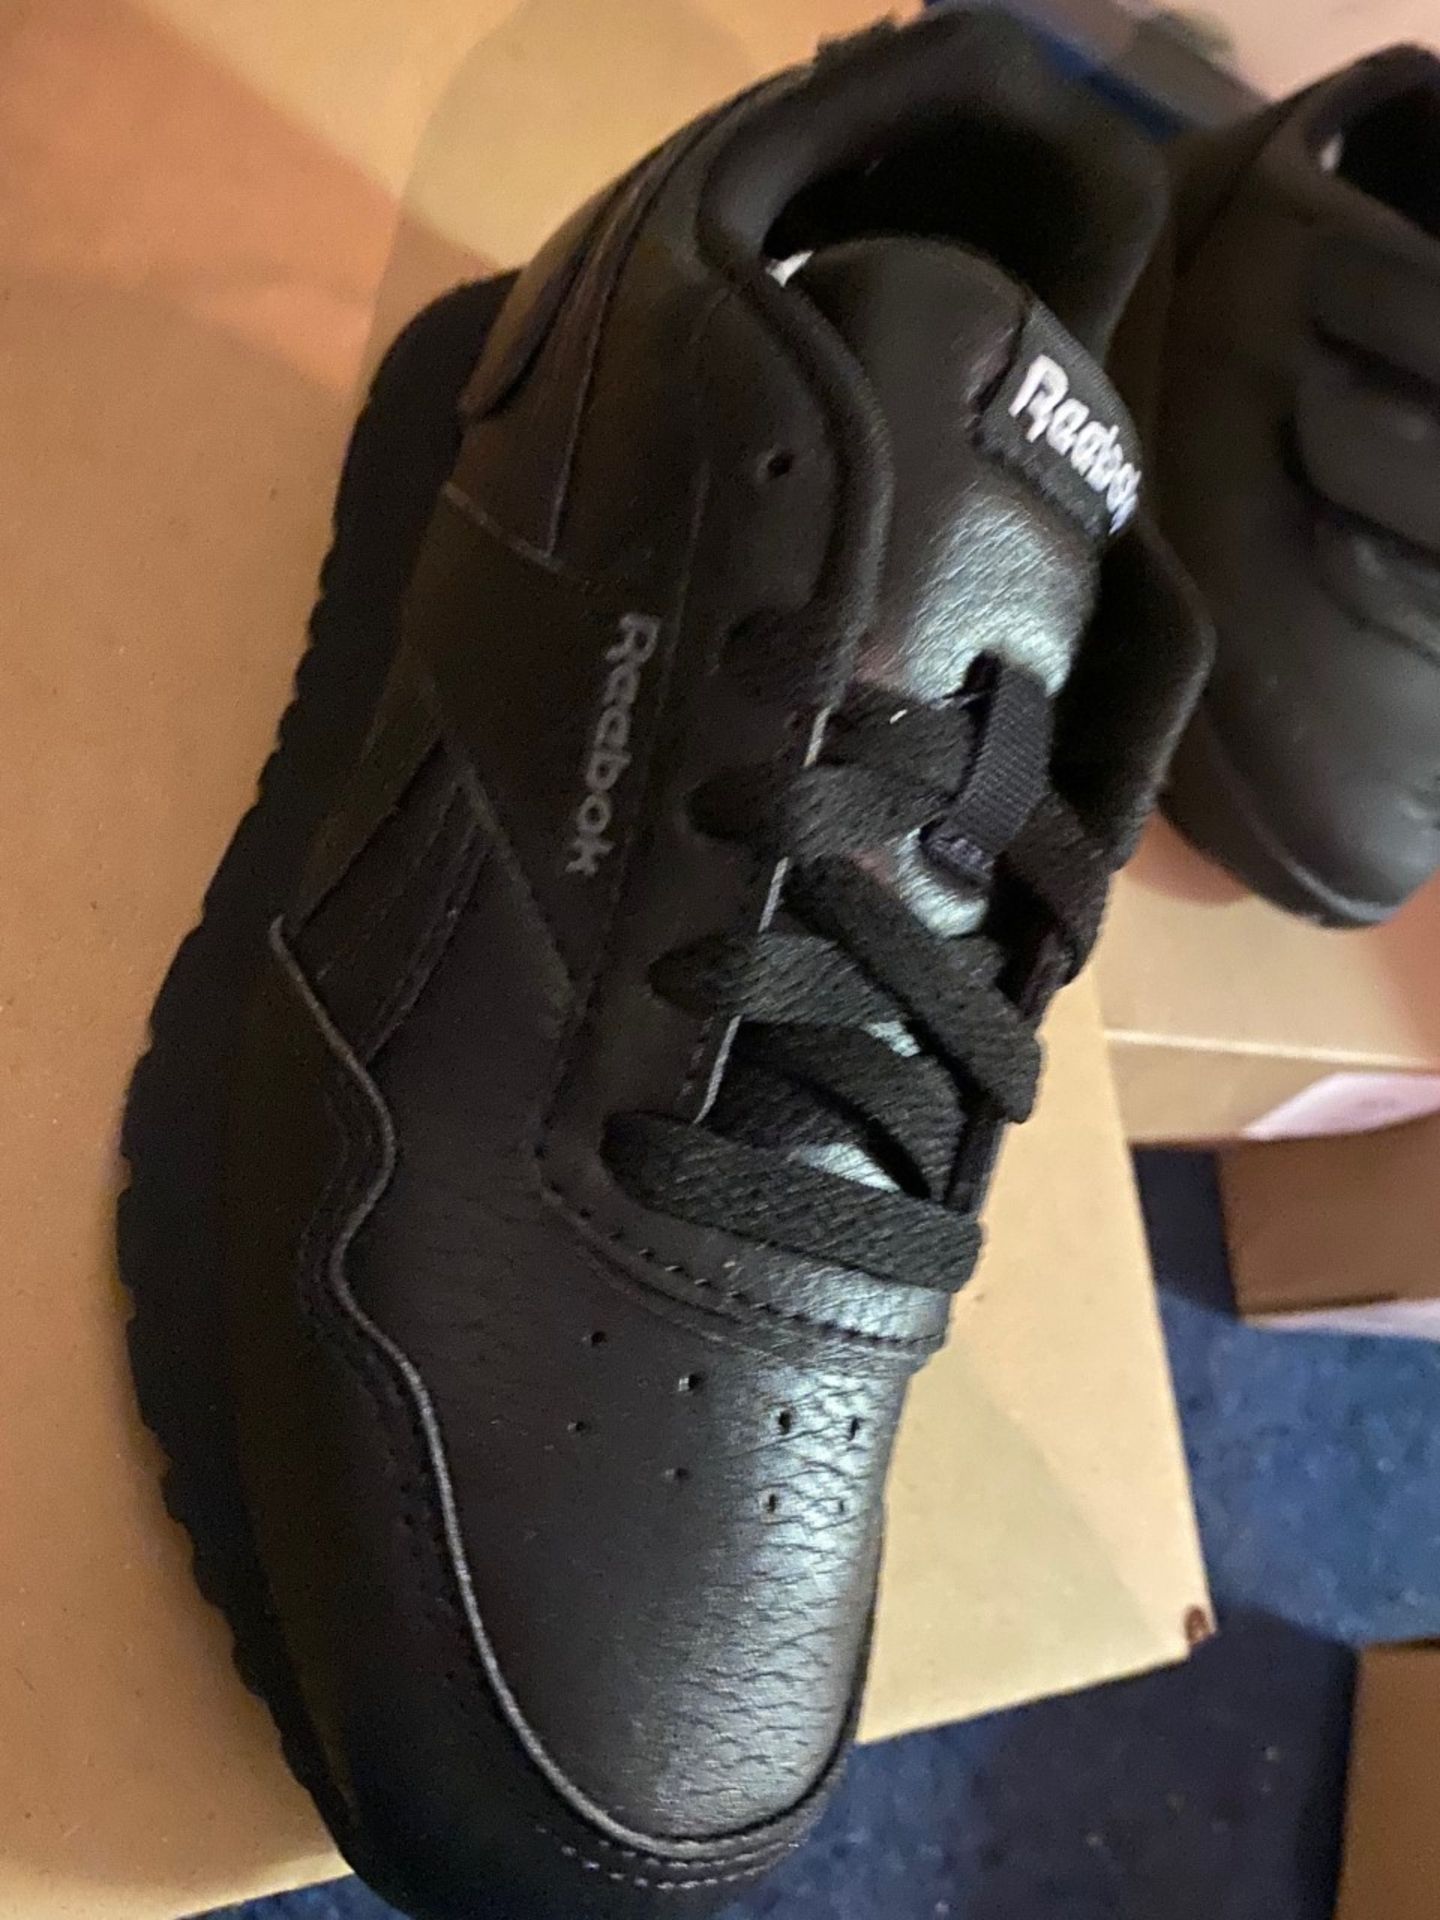 NEW AND BOXED REEBOK CLASSIC I-11 (77/7) - Image 2 of 2